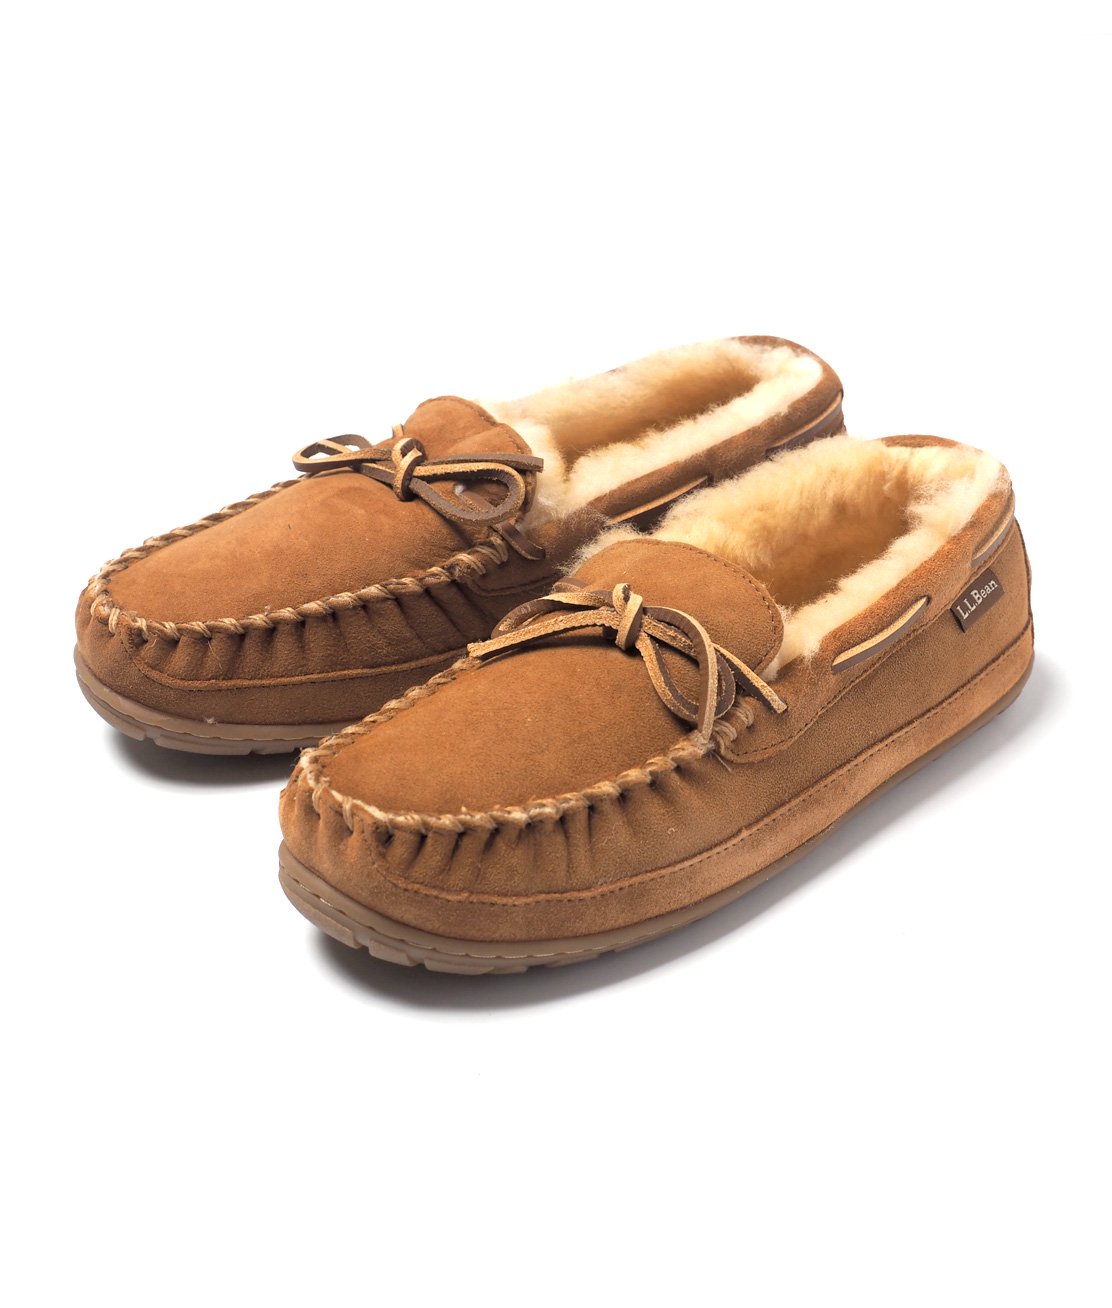 L.L.Bean】WICKED GOOD SLIPPER MOCCASINS - BROWN モカシンシューズ スリッパ - HUNKY DORY